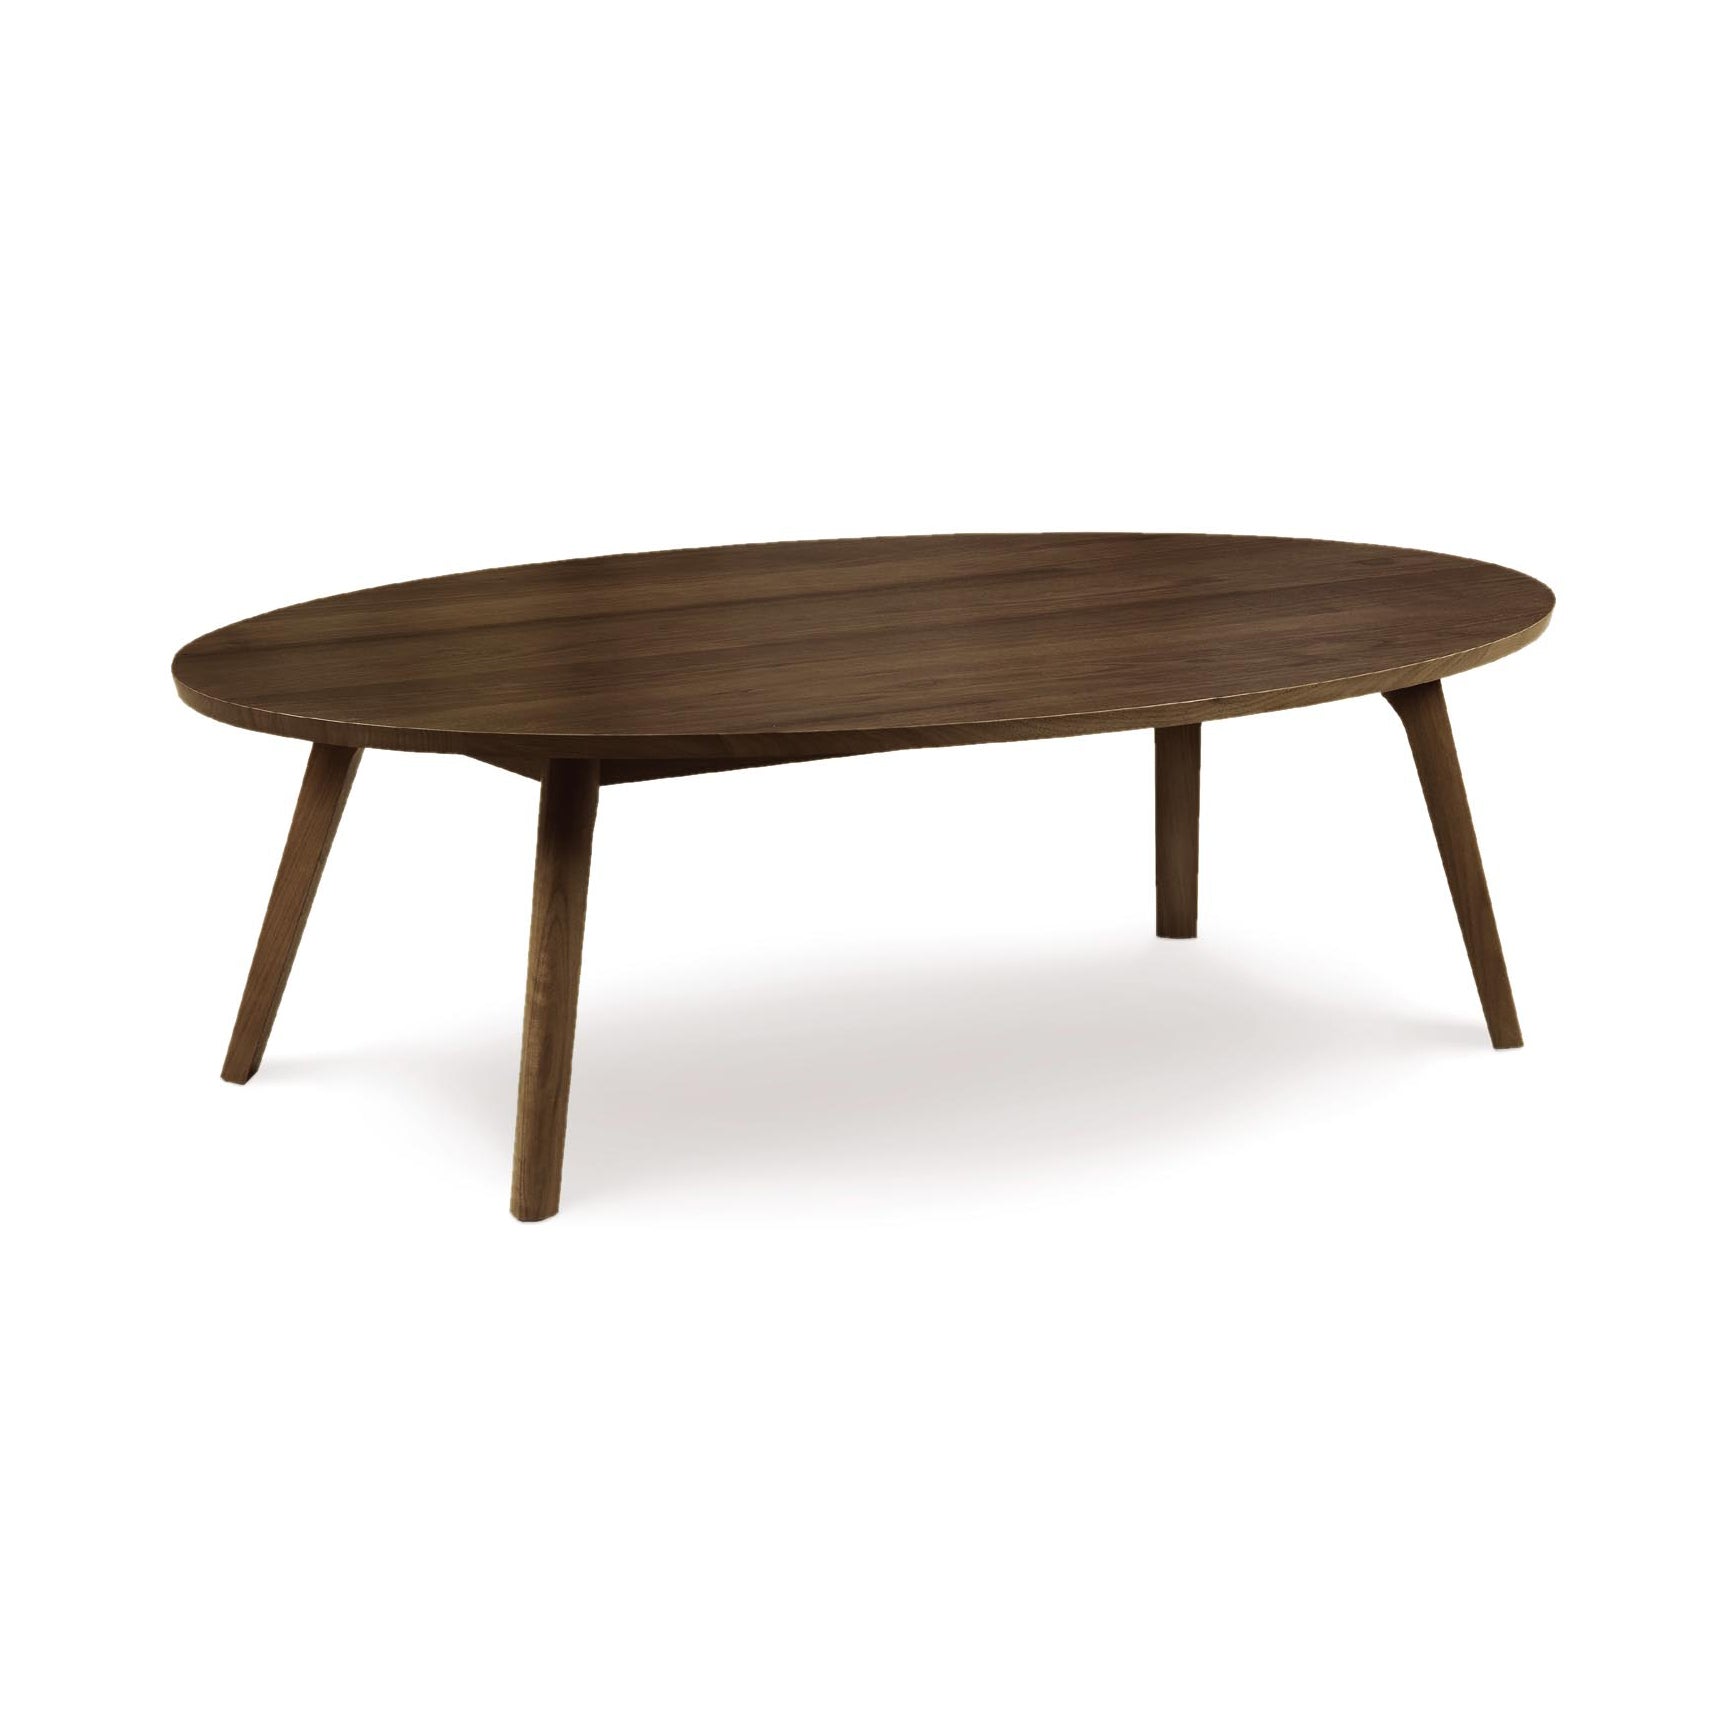 A Copeland Furniture Catalina Oval Coffee Table with mid-century American design, featuring sustainably harvested hardwood and four angled legs on a white background.